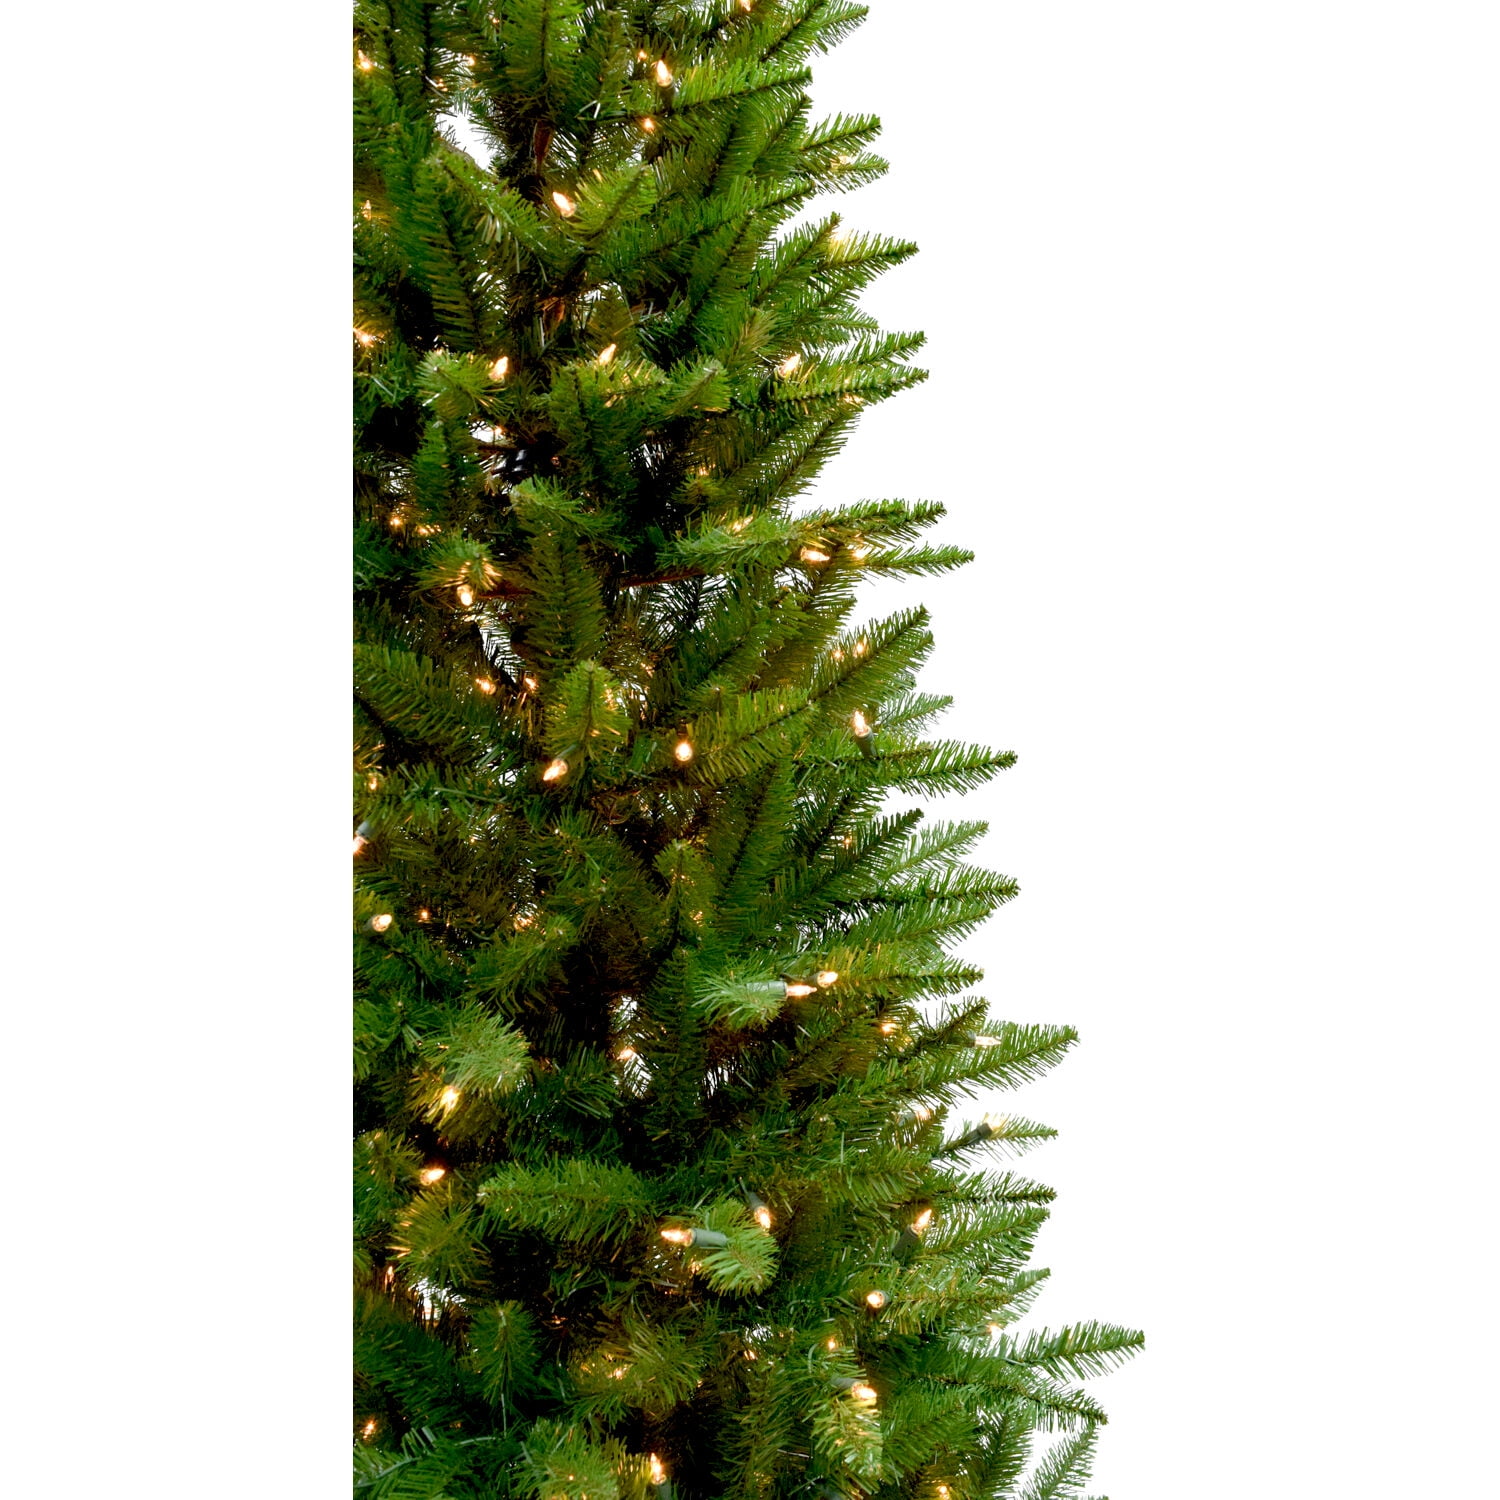 Christmas Time 6.5' Kringle Pine Artificial Christmas Tree with Multicolor C6 LED Lights and Remote Control, CT-KPS065-ML